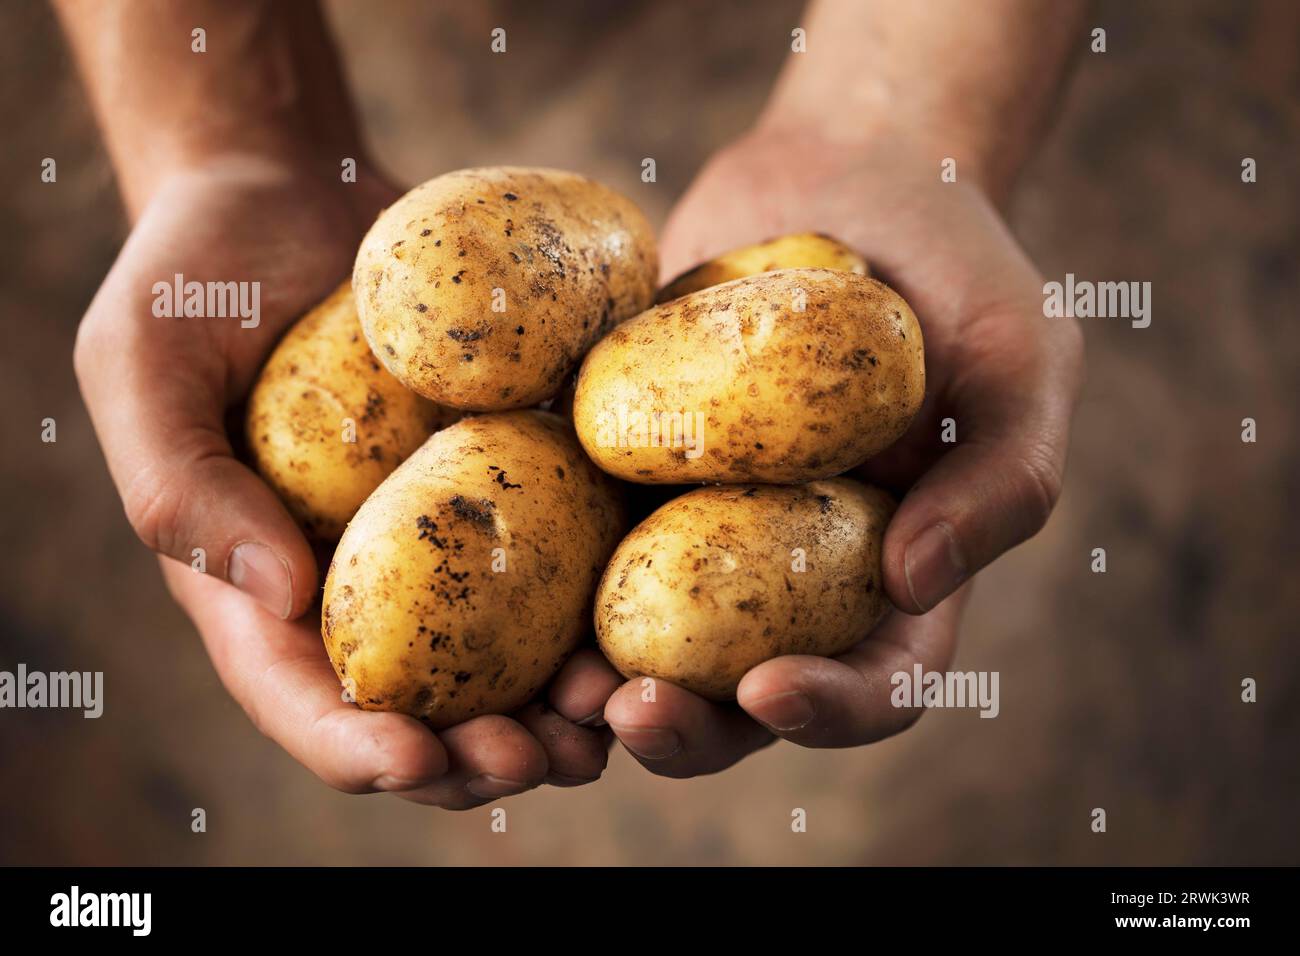 Hands holding dirty harvested potatoes Stock Photo